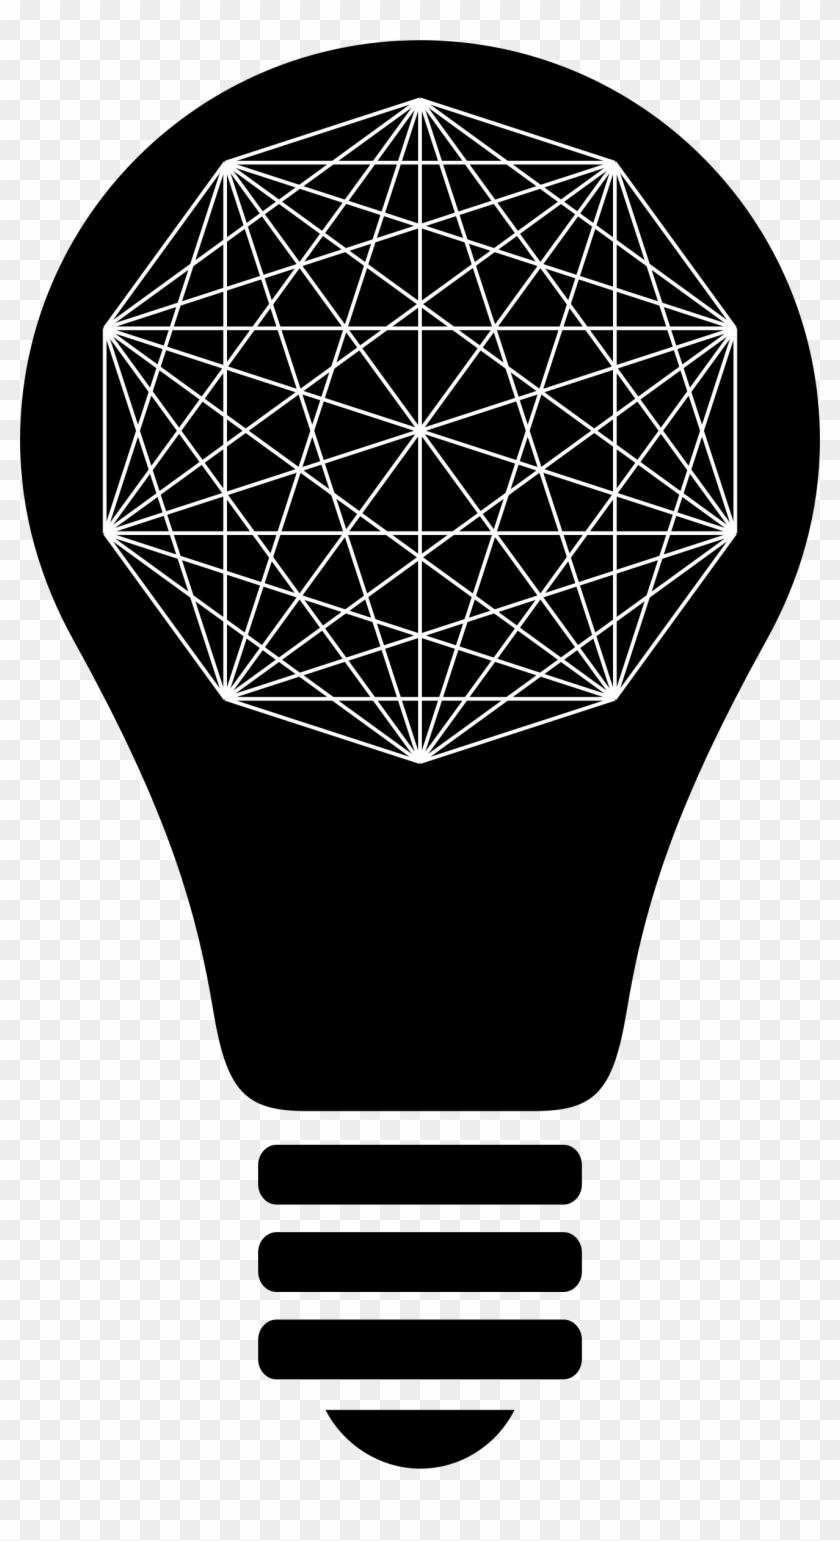 This Free Icons Png Design Of Abstract Light Bulb Silhouette - Golden Decagon Clipart #3702513